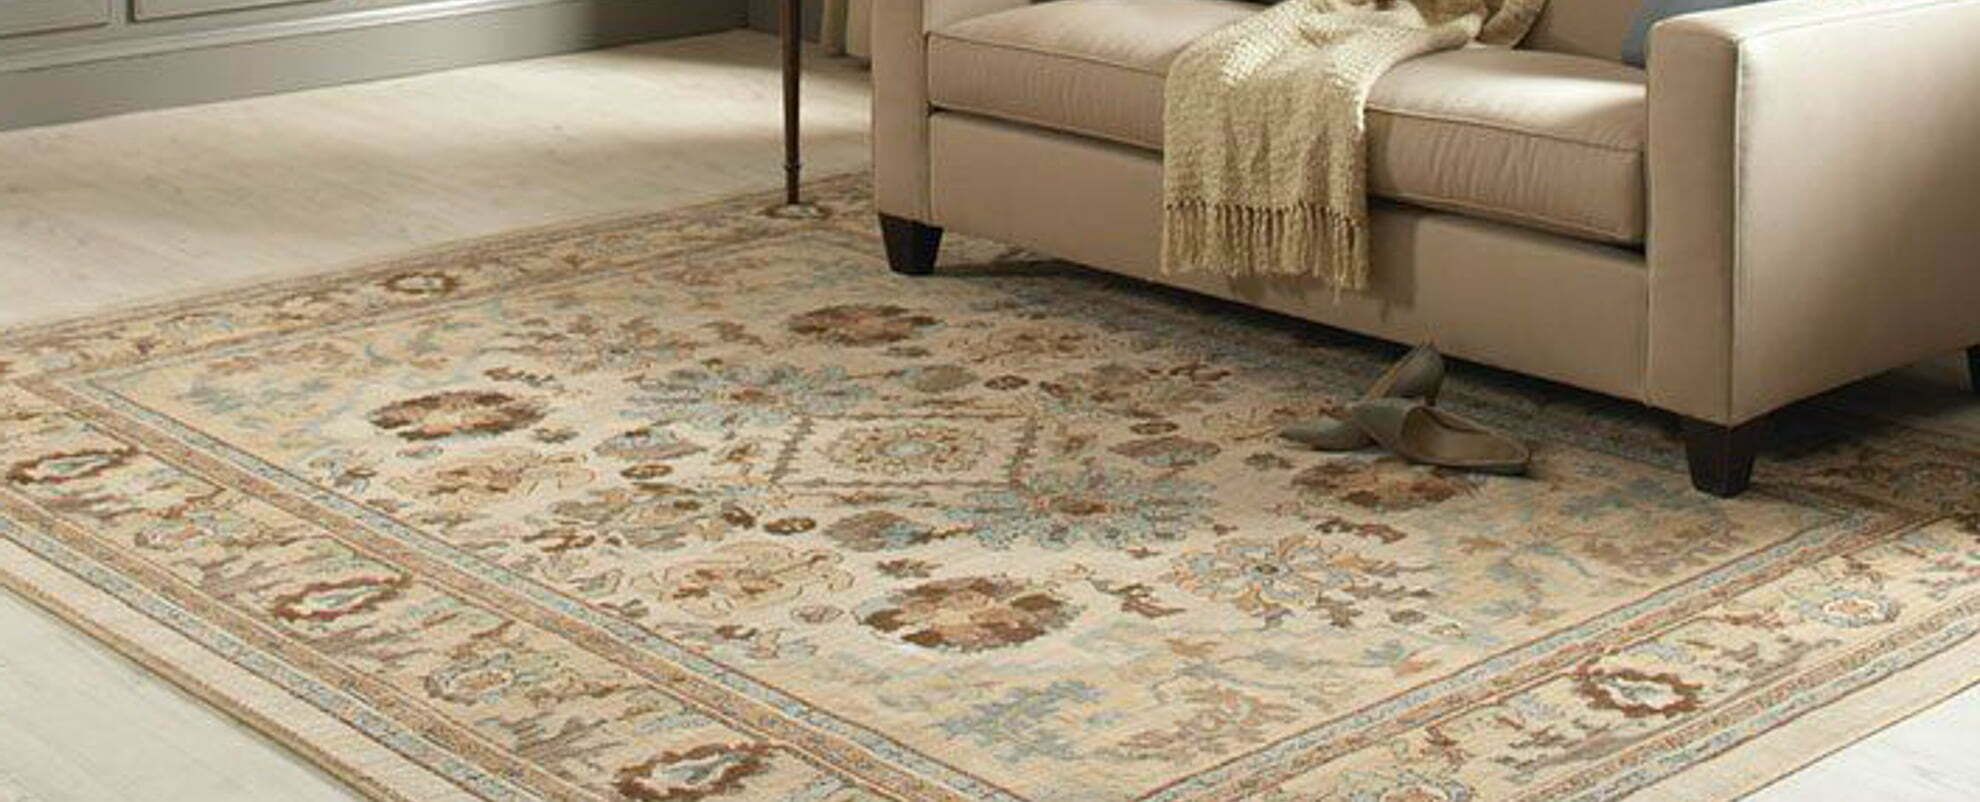 6 Reasons Why Expert Cleaners Should Handle Your Area Rug